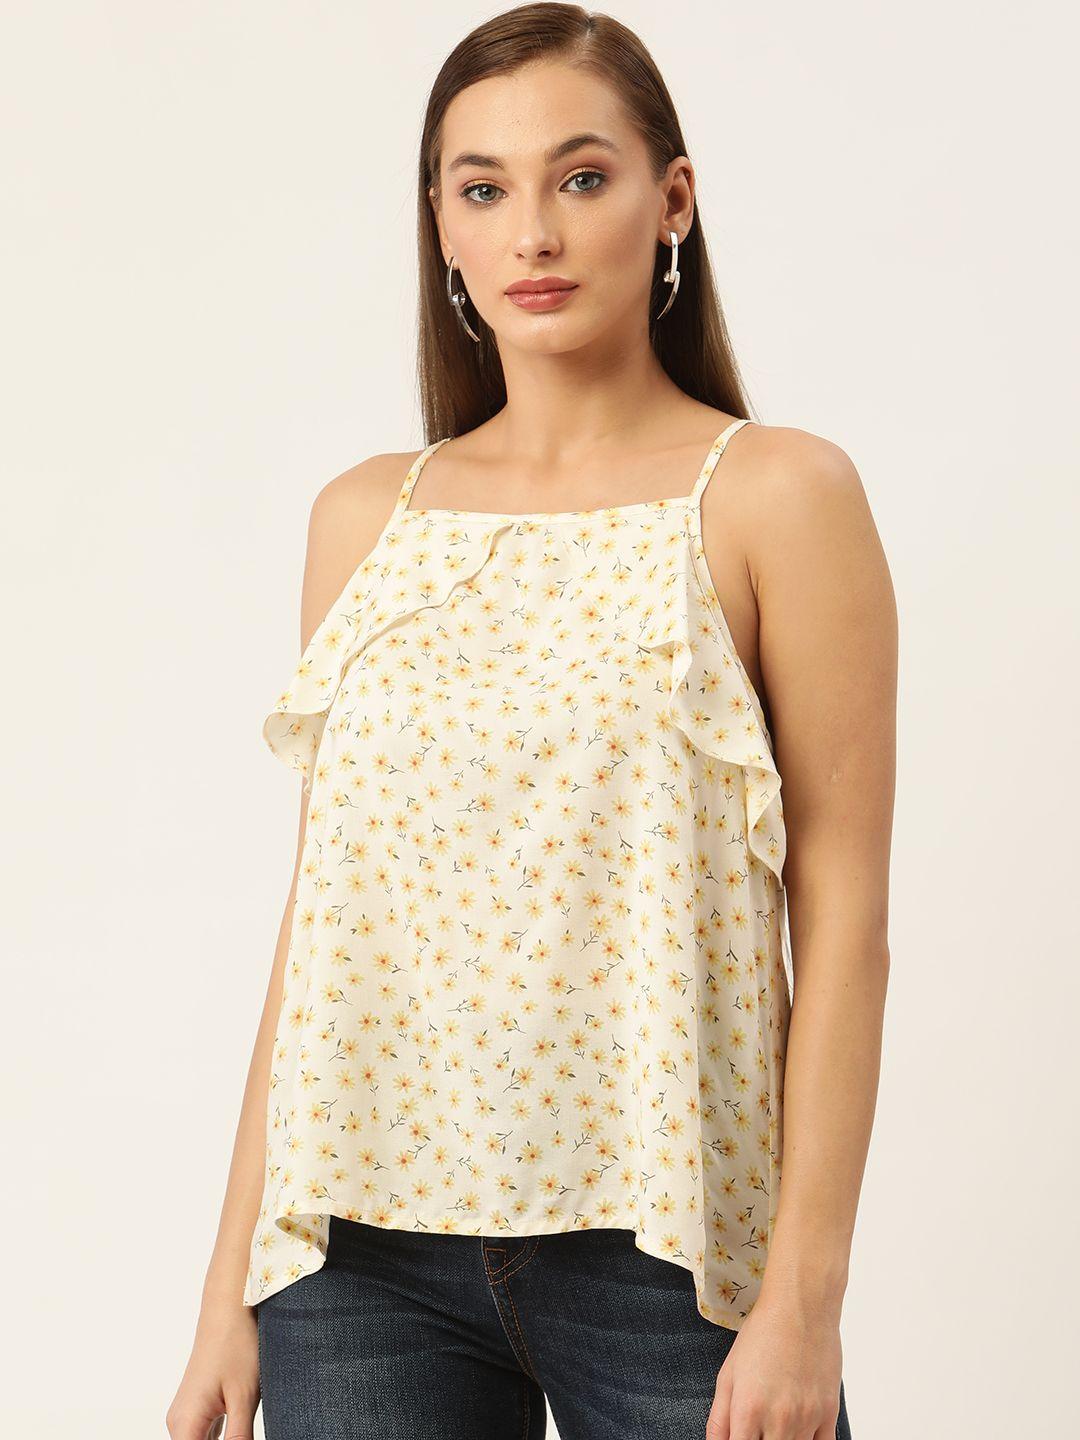 rue collection off white & yellow floral print ruffles top